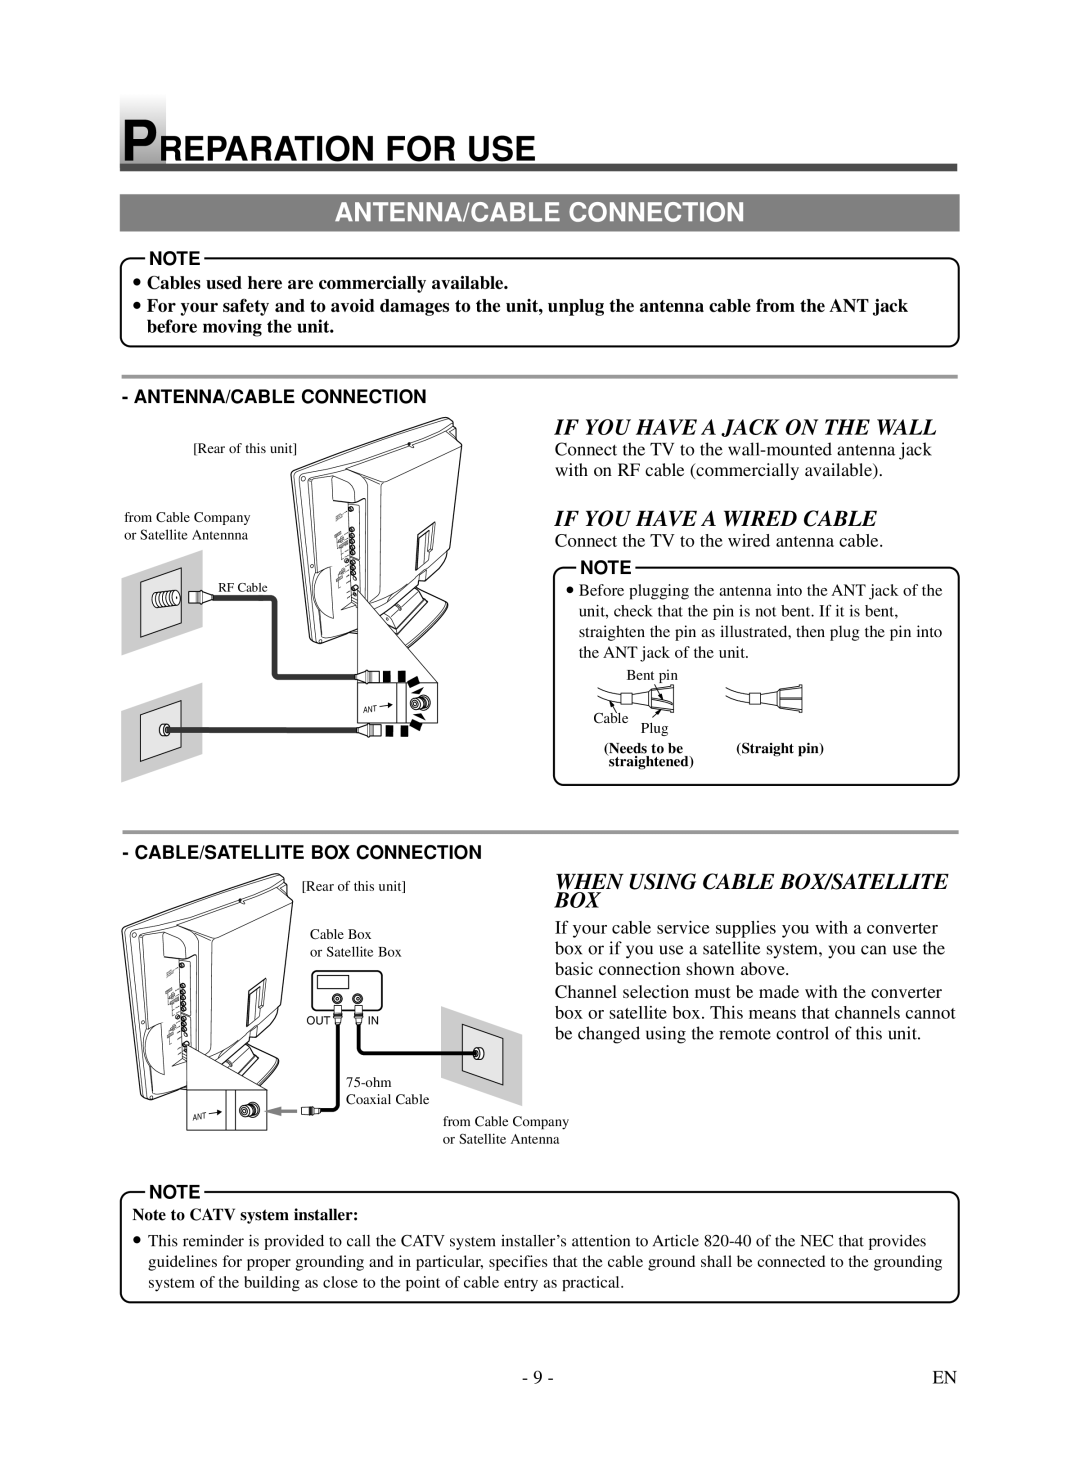 Symphonic LCD TV/DVD owner manual Preparation For Use, Antenna/Cable Connection, If You Have A Jack On The Wall 